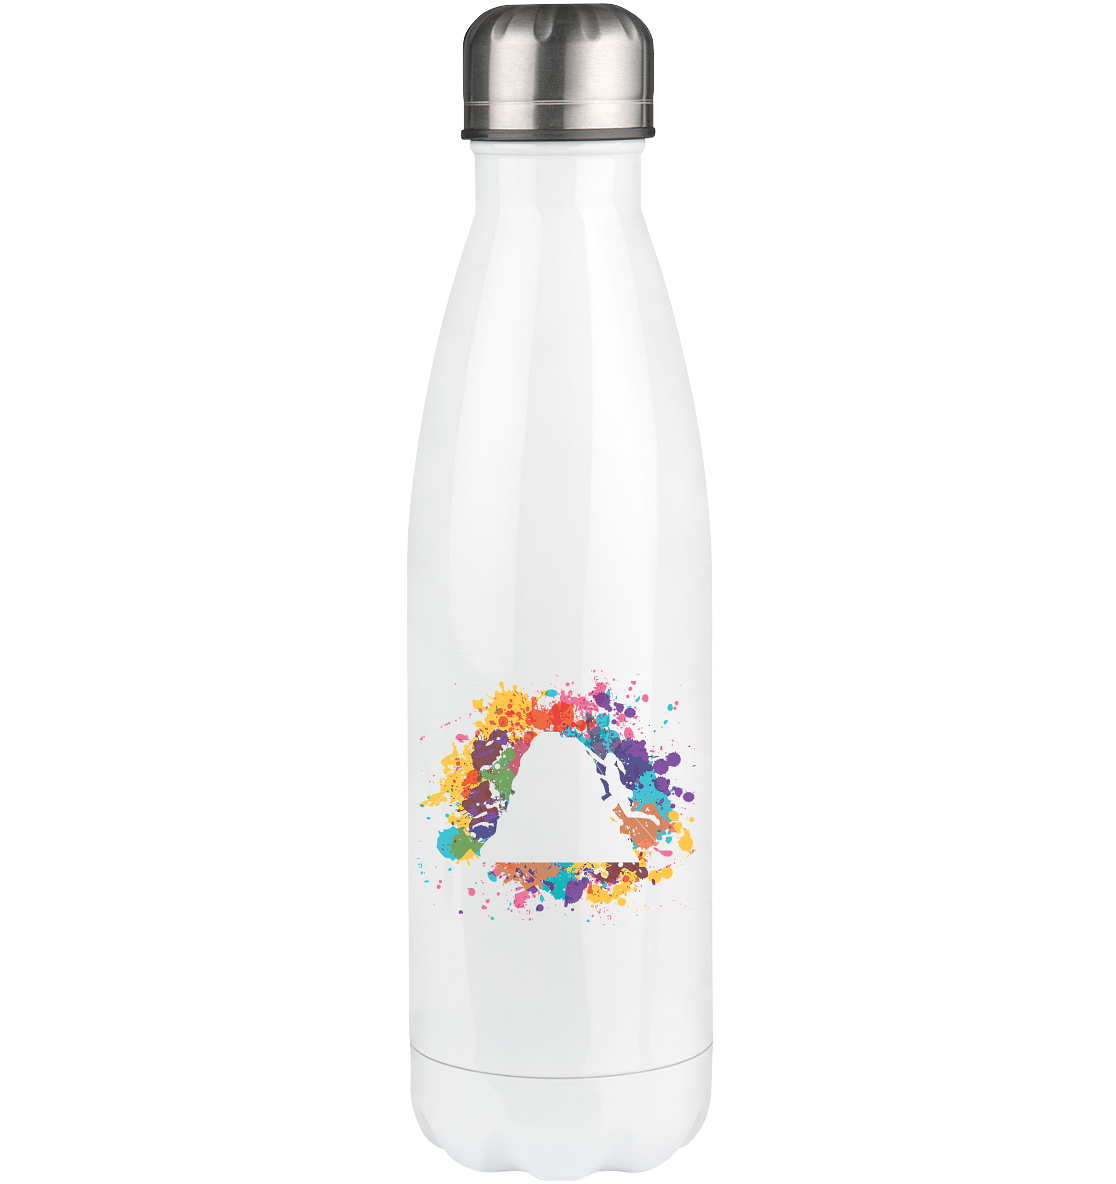 Colorful Splash and Climbing 1 - Edelstahl Thermosflasche klettern 500ml